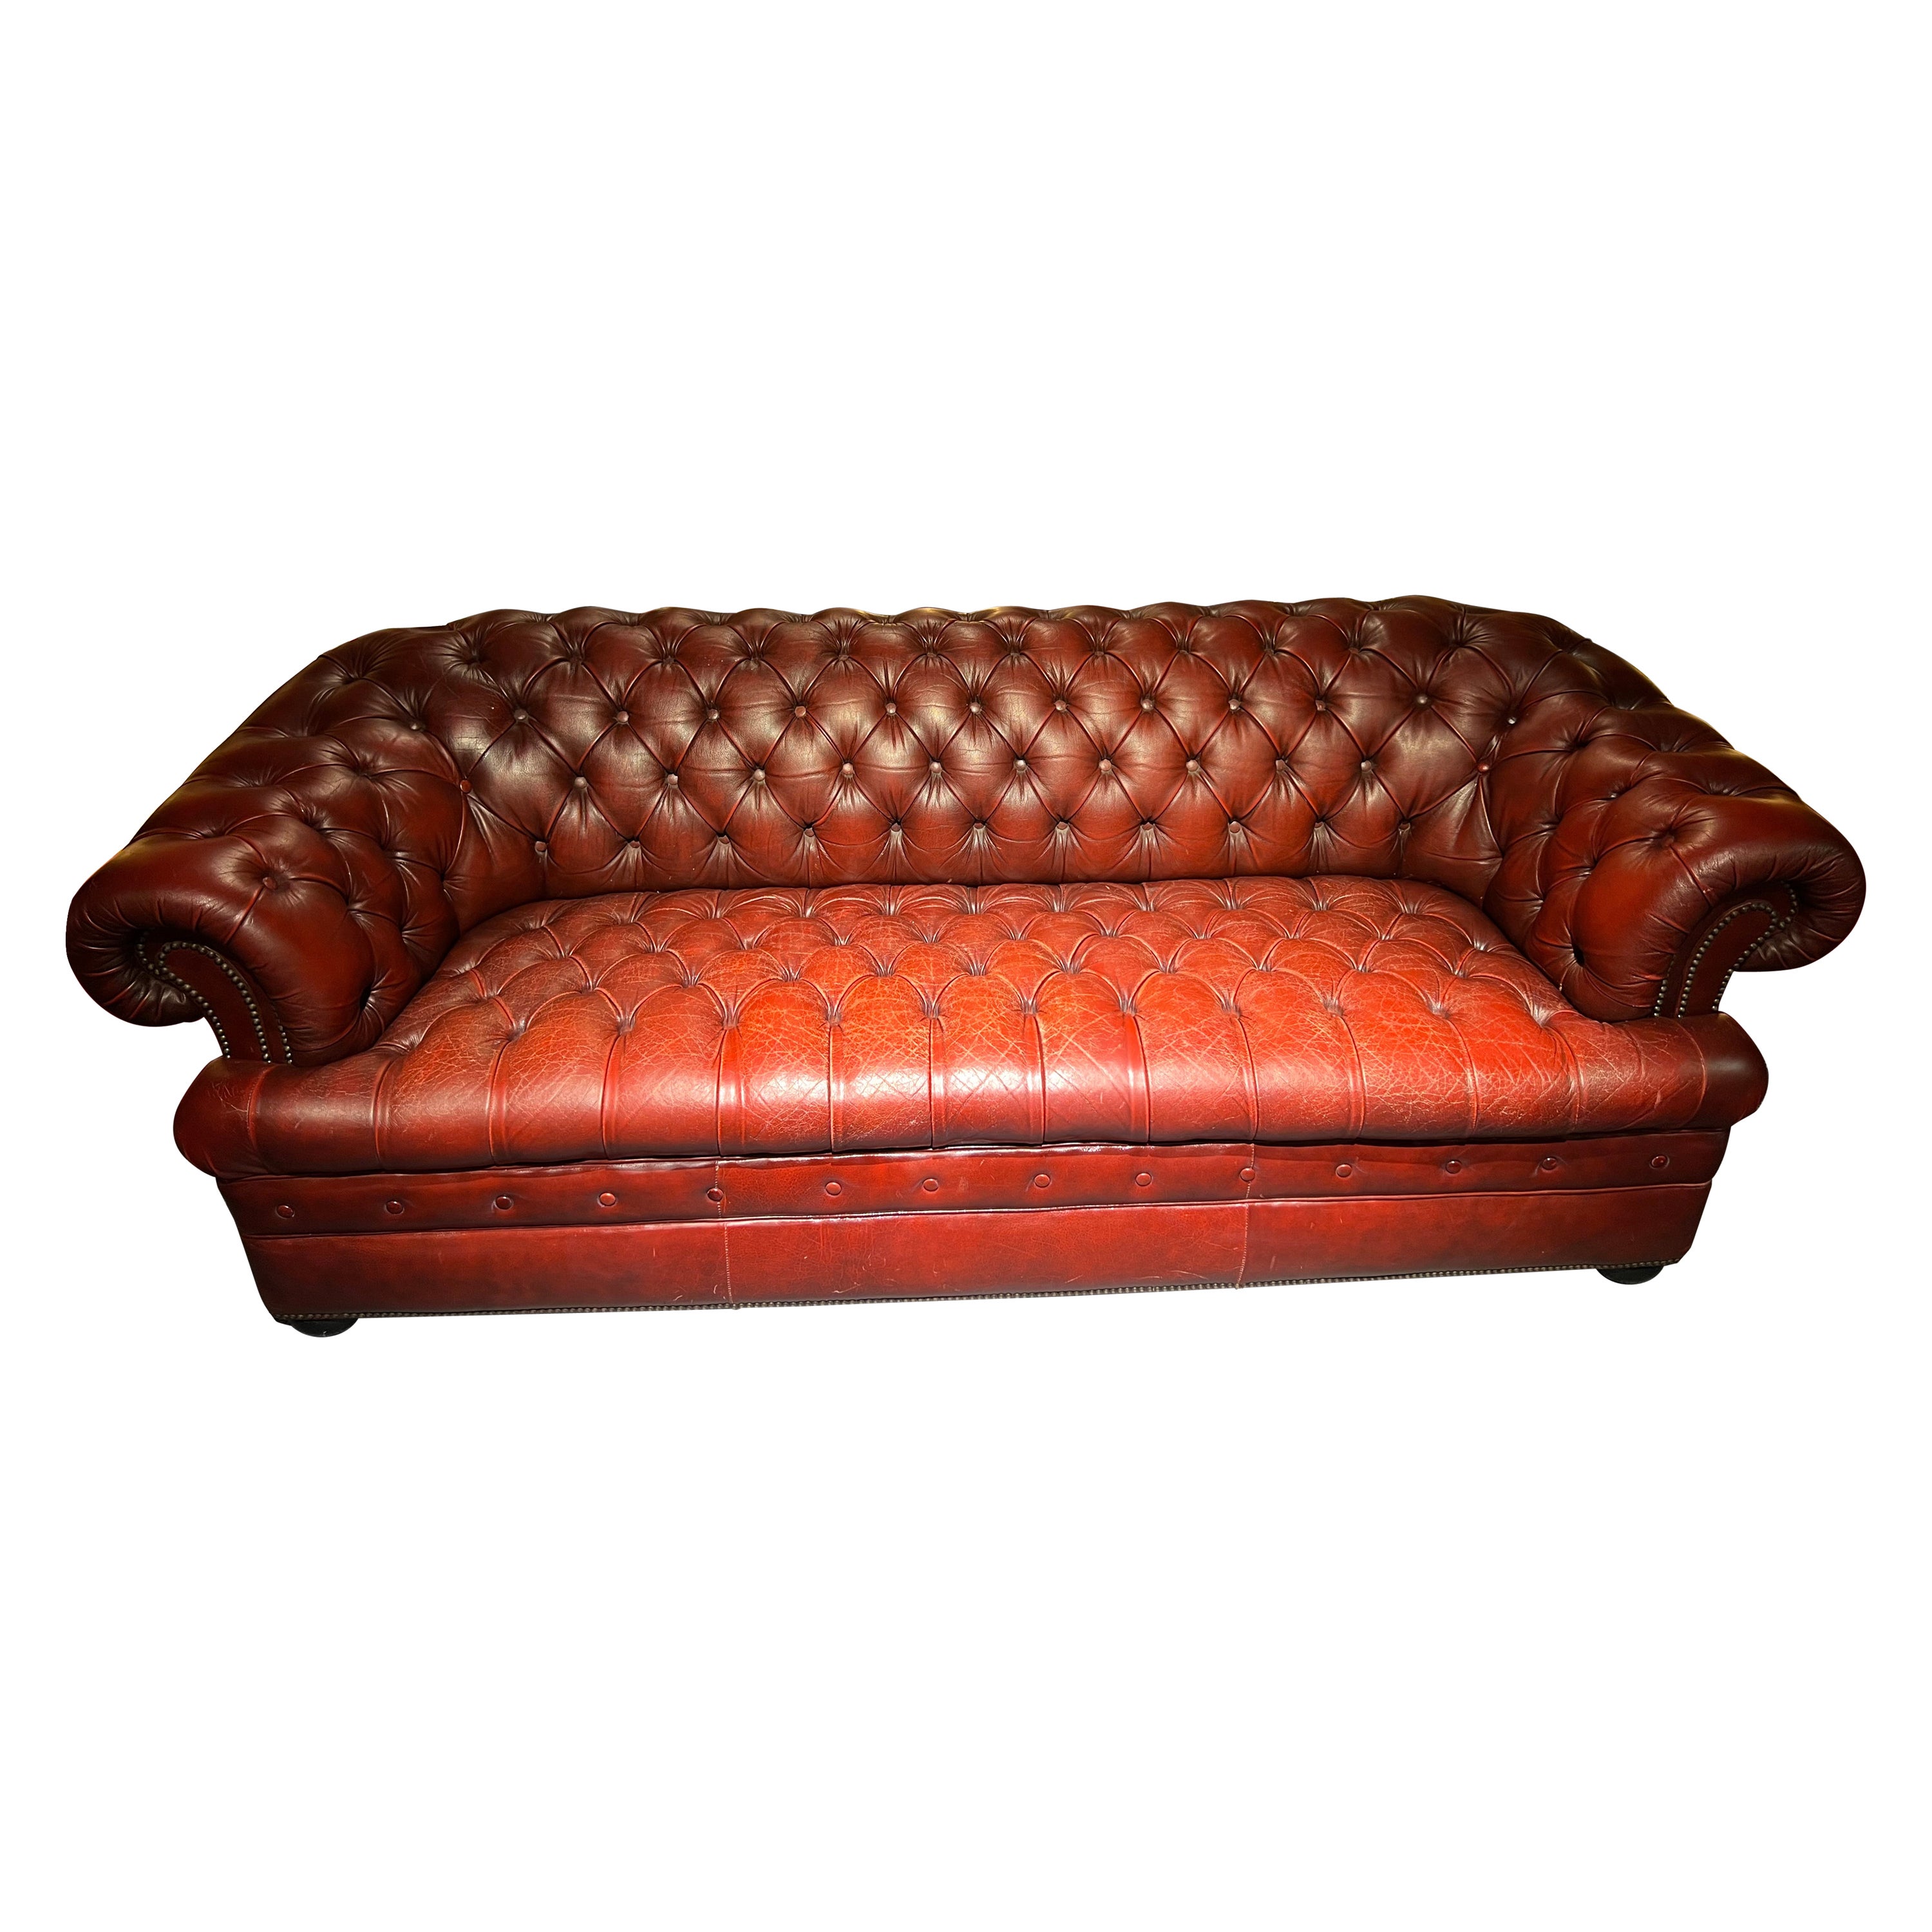 Red Leather Chesterfield 3 Seater Sofa